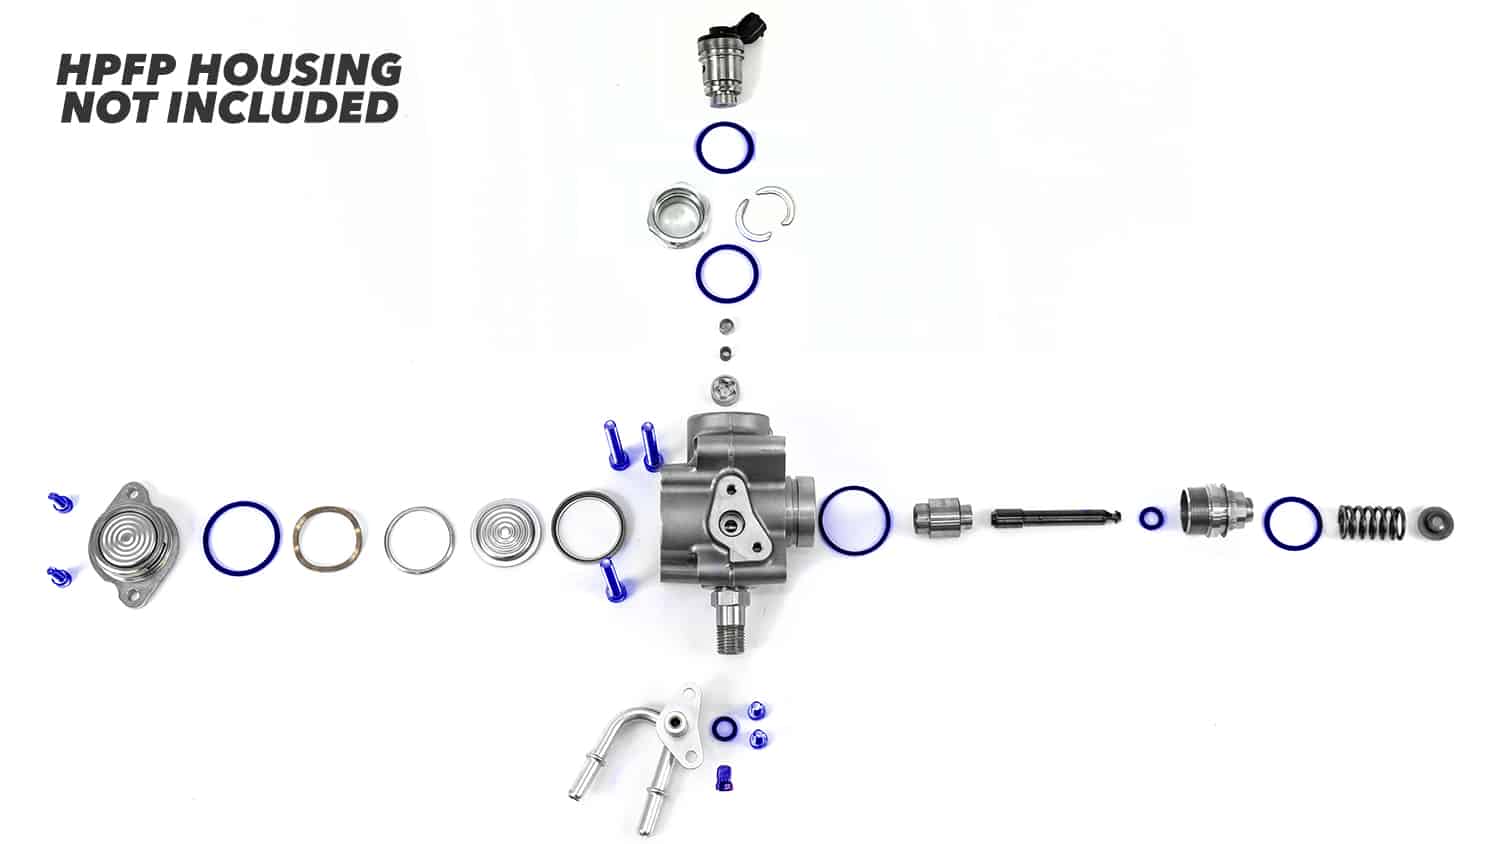 See what's included in the exploded view